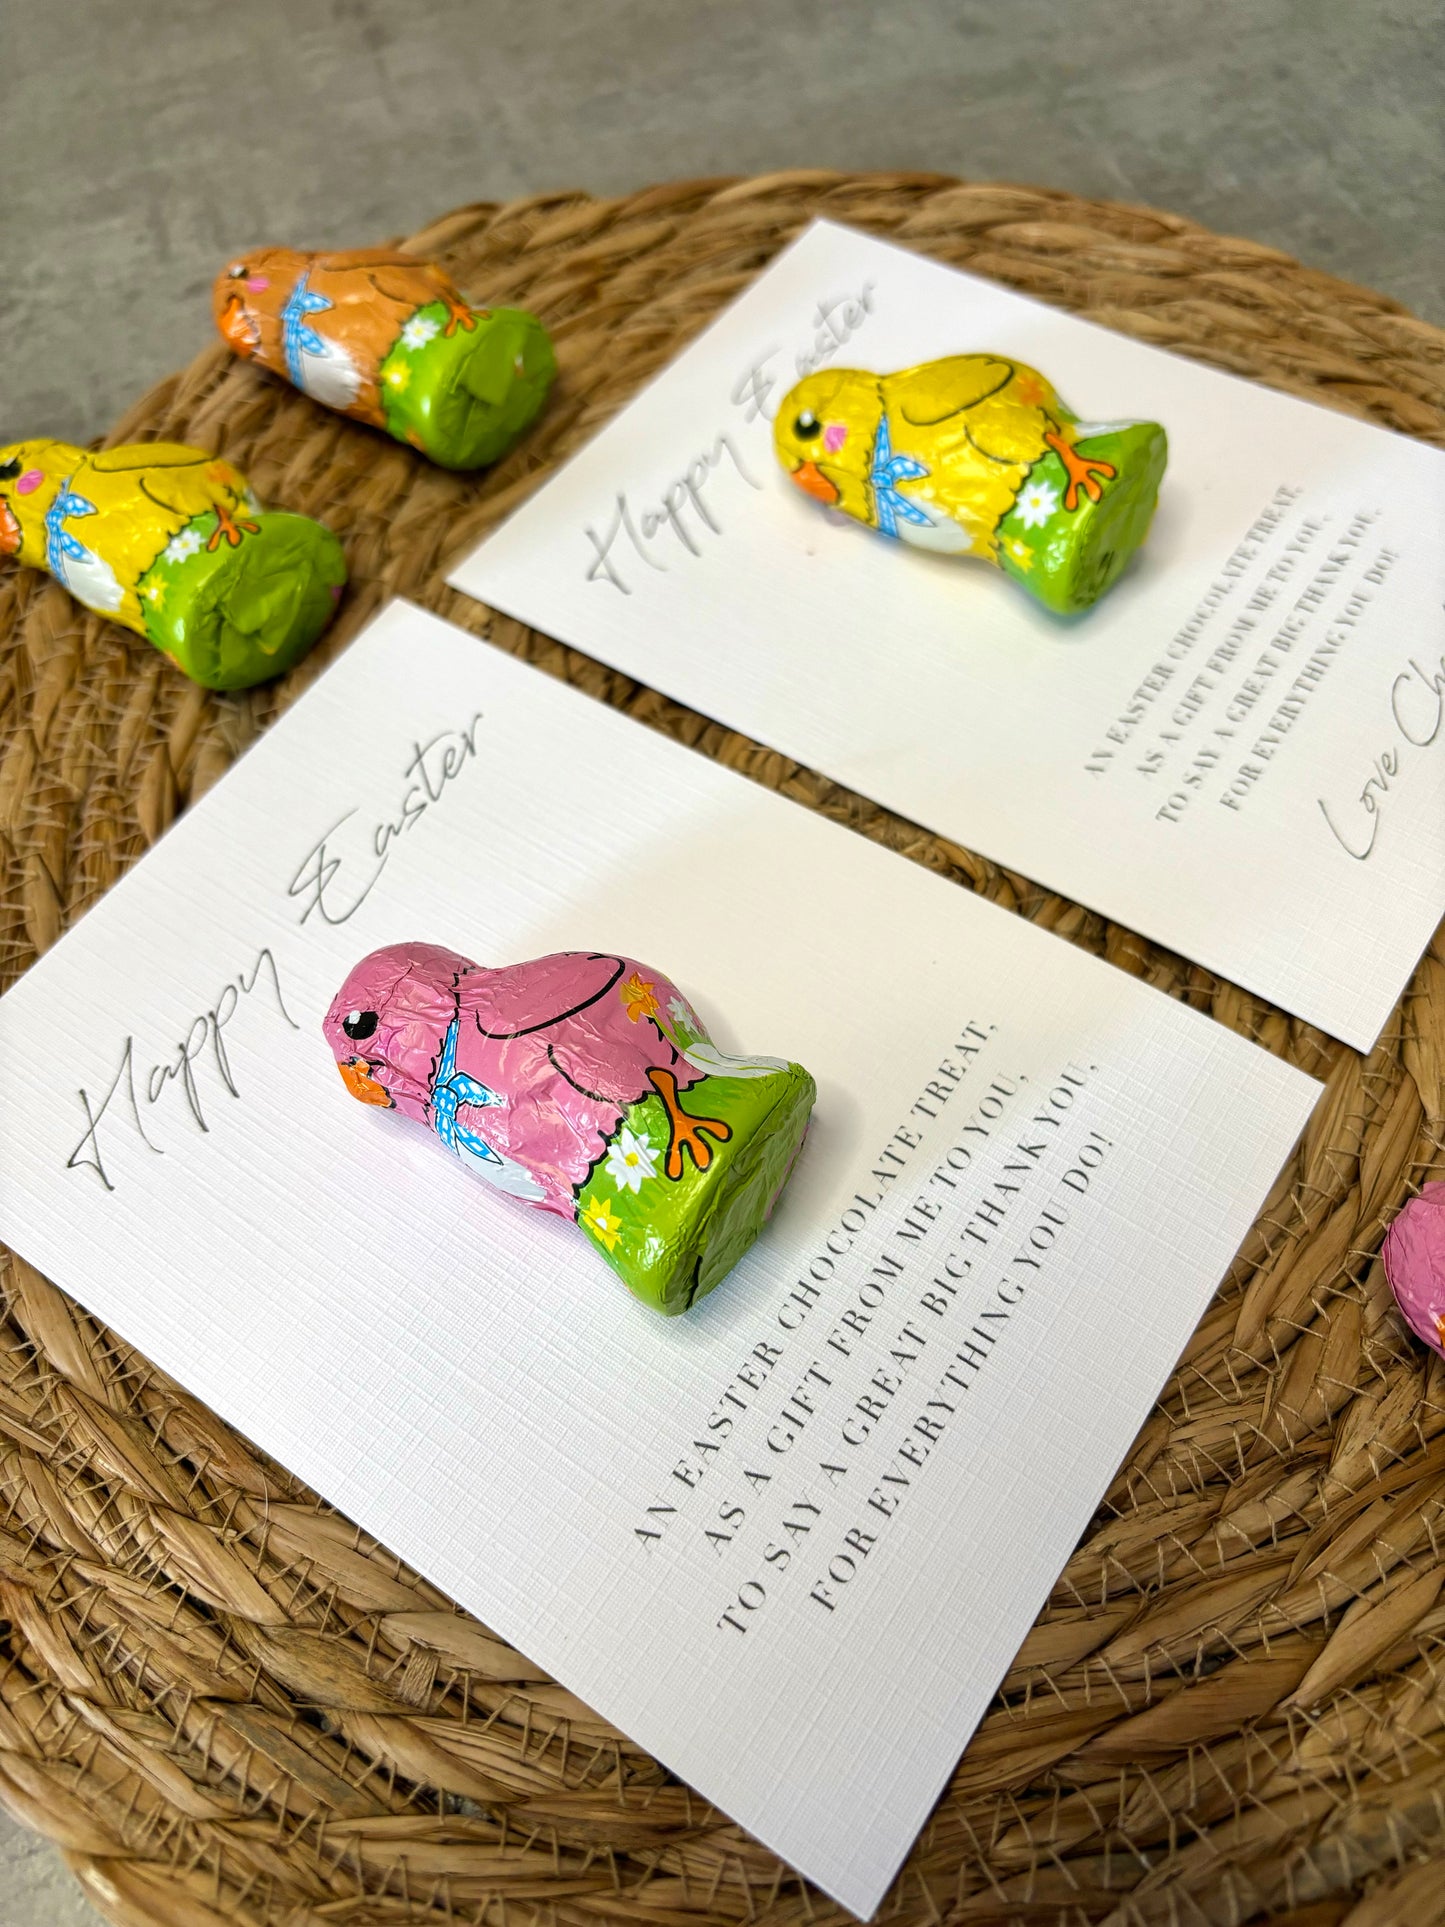 Personalised Easter Chick Chocolate Gift